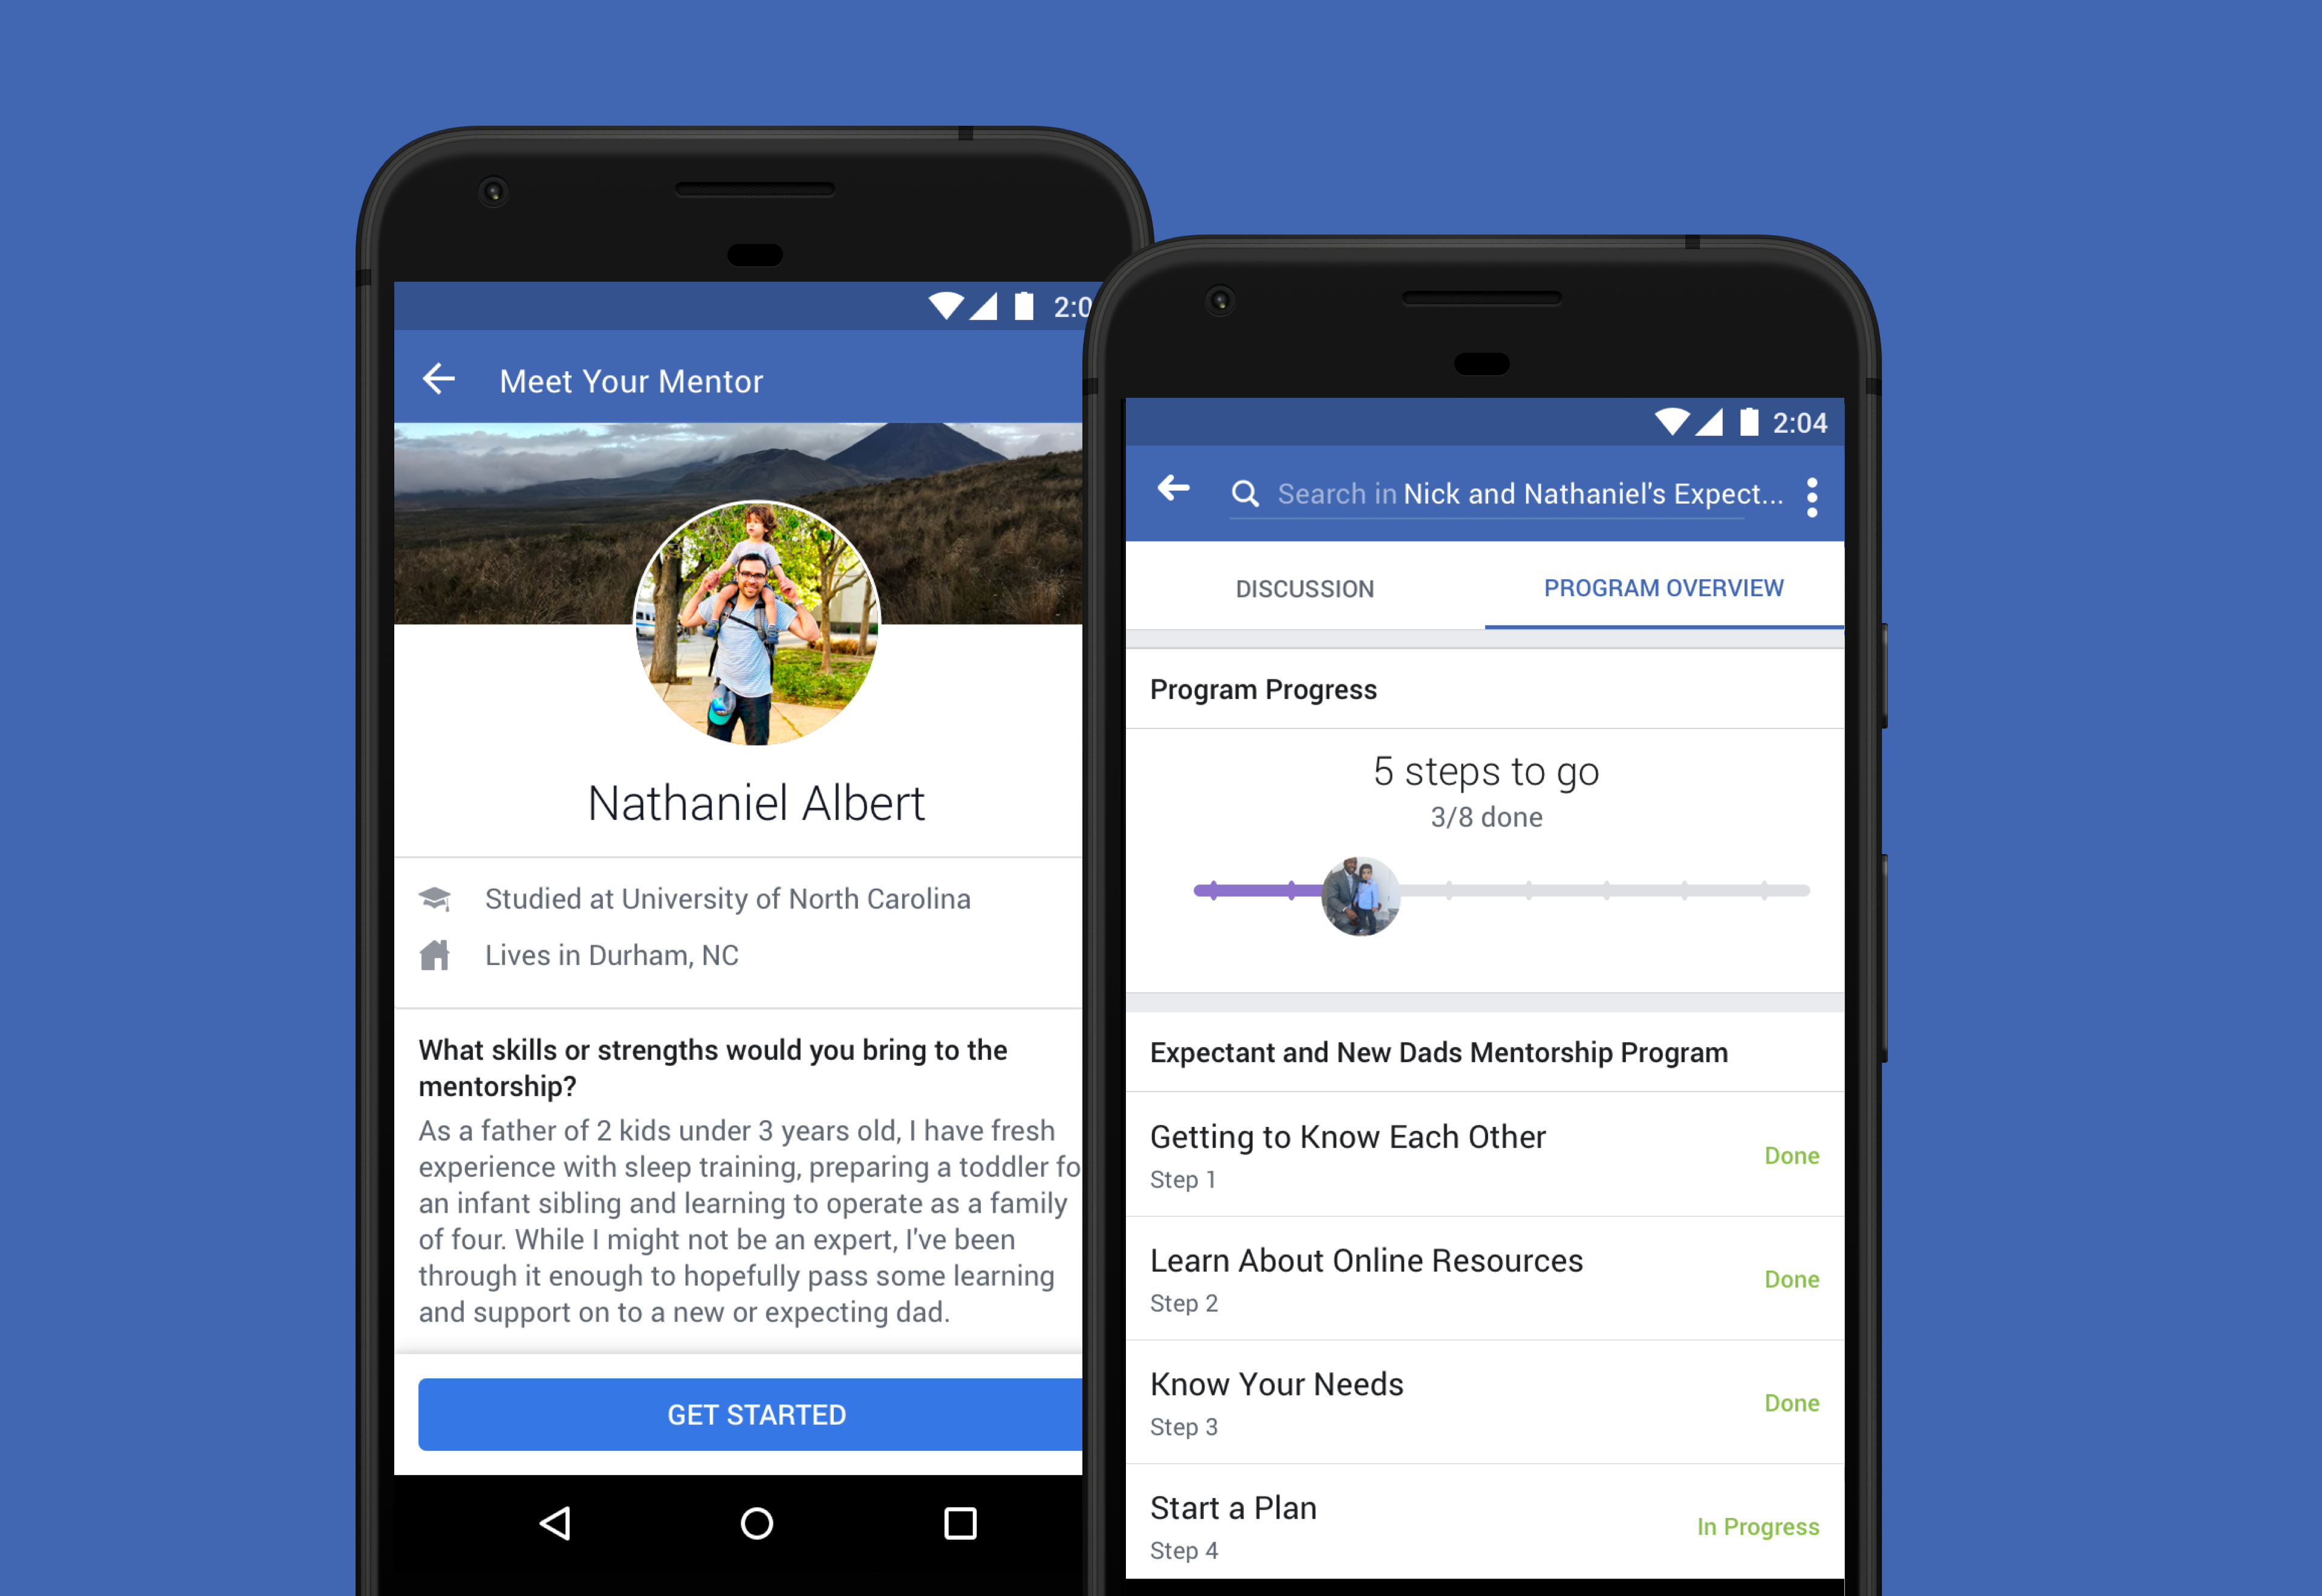 Facebook Groups rolls out a platform for finding Mentors and Mentees